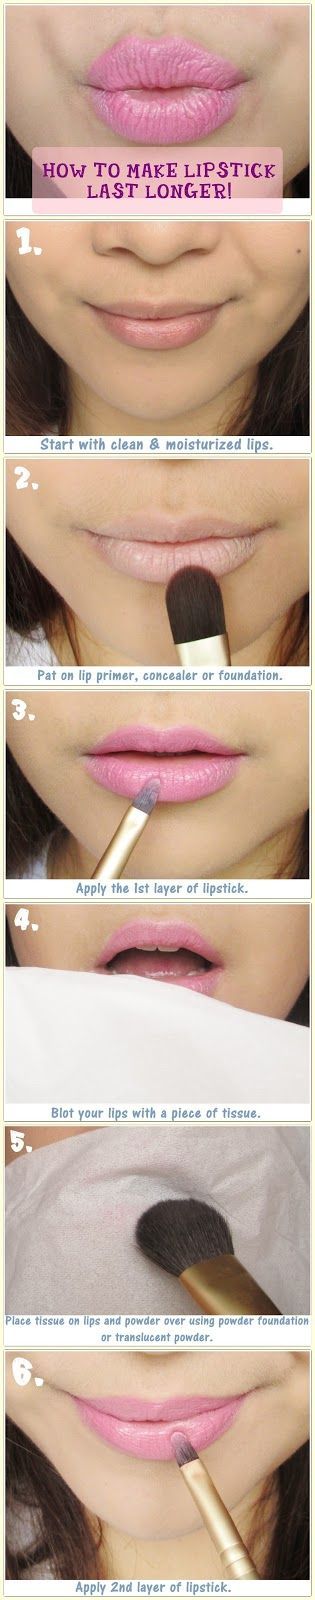 How to Make Lipstick Last Longer on Your Lips!